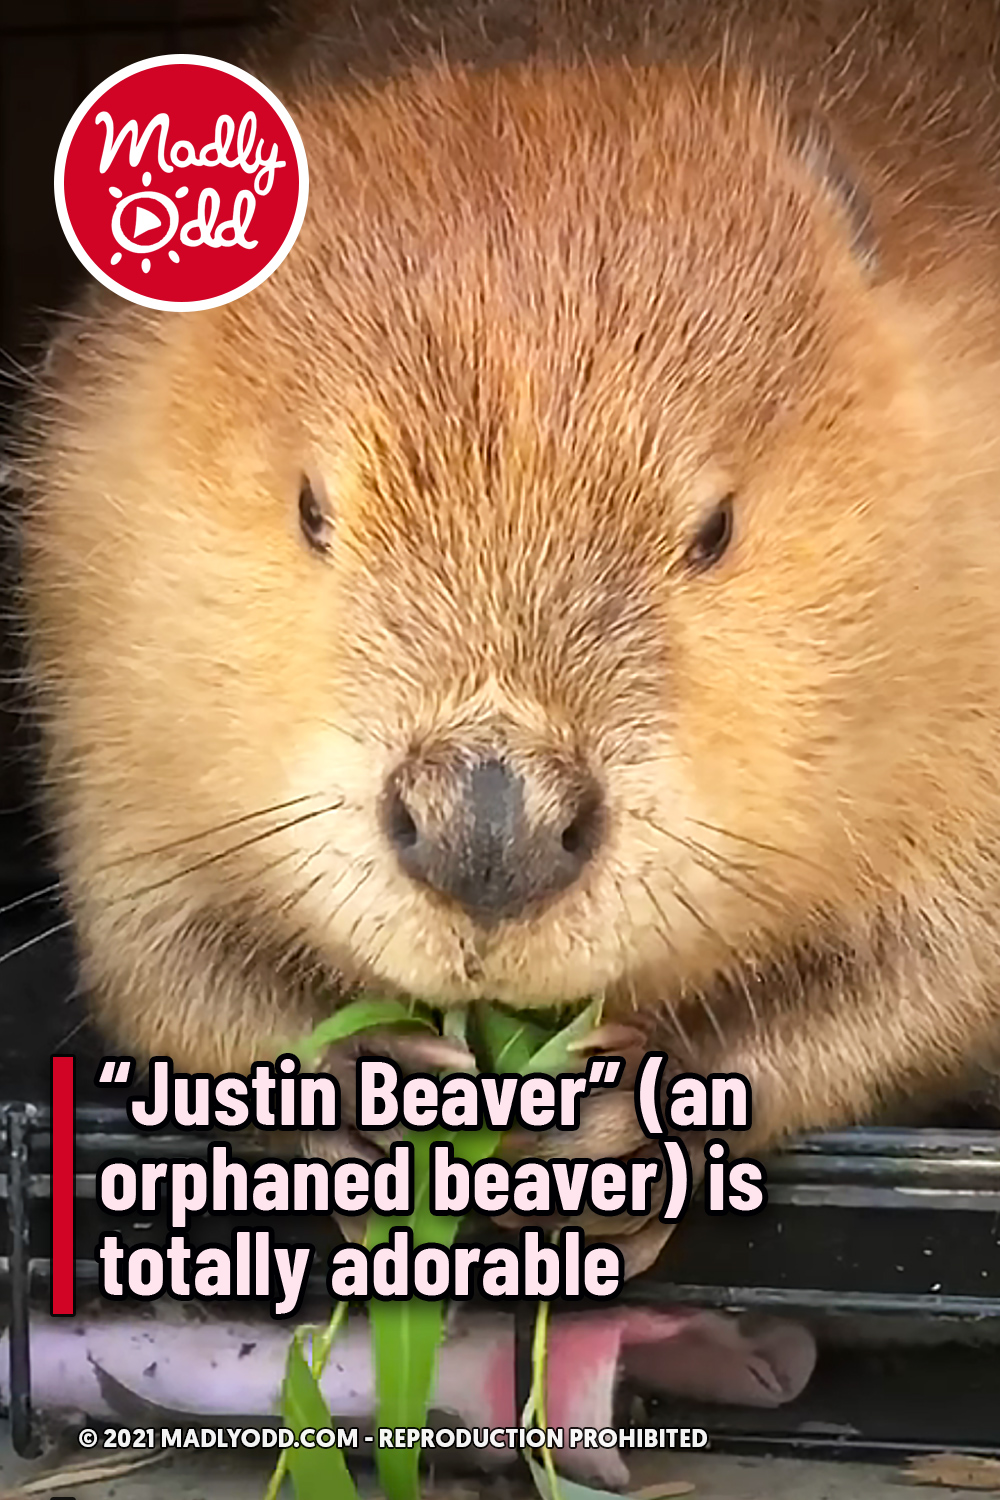 “Justin Beaver” (an orphaned beaver) is totally adorable